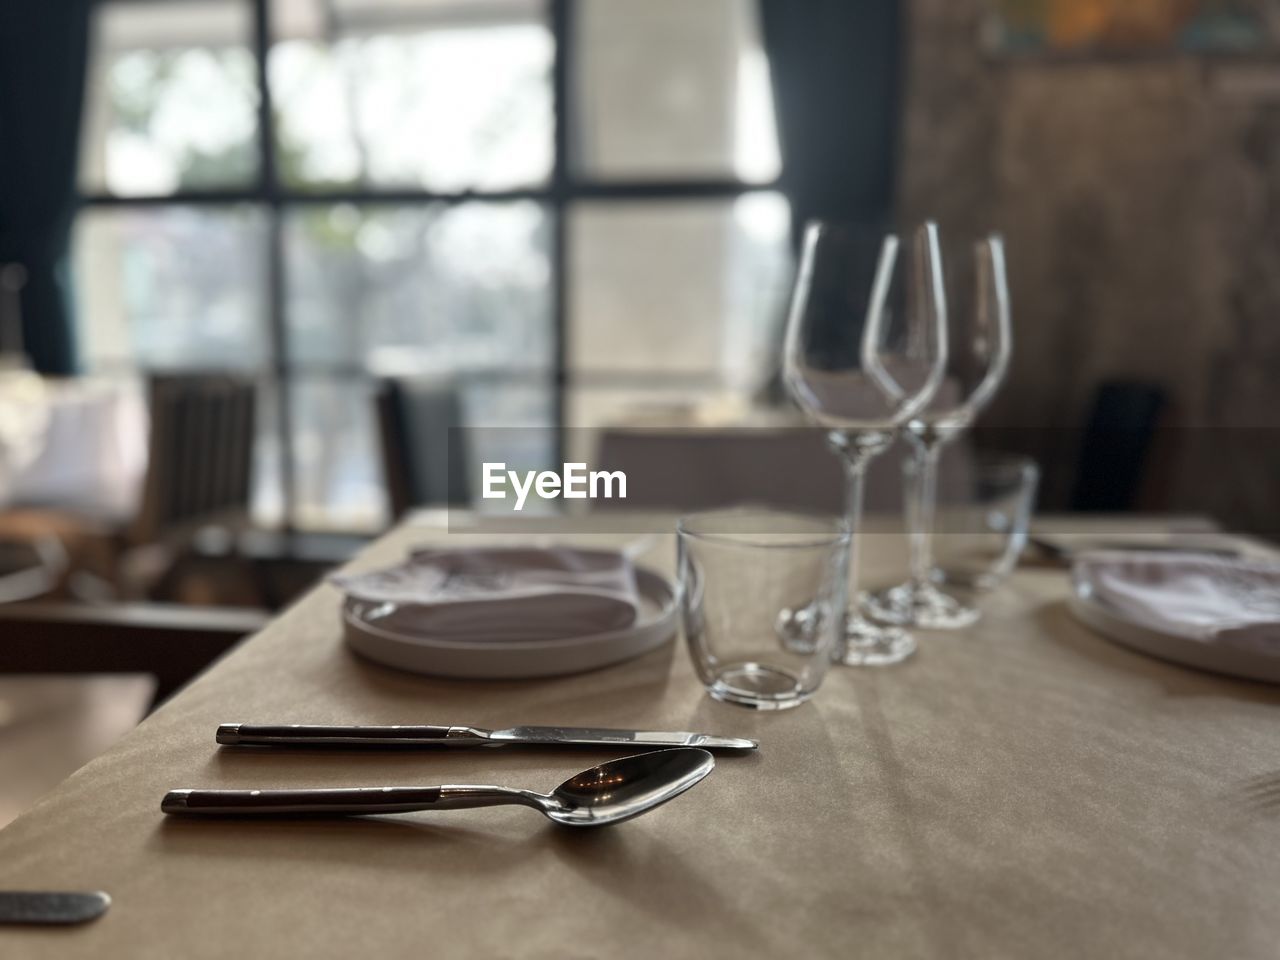 table, glass, setting, household equipment, eating utensil, place setting, kitchen utensil, fork, indoors, drinking glass, wine glass, furniture, dining table, food and drink, table knife, napkin, knife, business, restaurant, plate, no people, silverware, crockery, room, spoon, absence, empty, elegance, focus on foreground, drink, dining, empty plate, arrangement, meal, tablecloth, luxury, dining room, wealth, day, window, seat, domestic room, food, food and drink industry, wood, chair, selective focus, close-up, anticipation, still life, refreshment